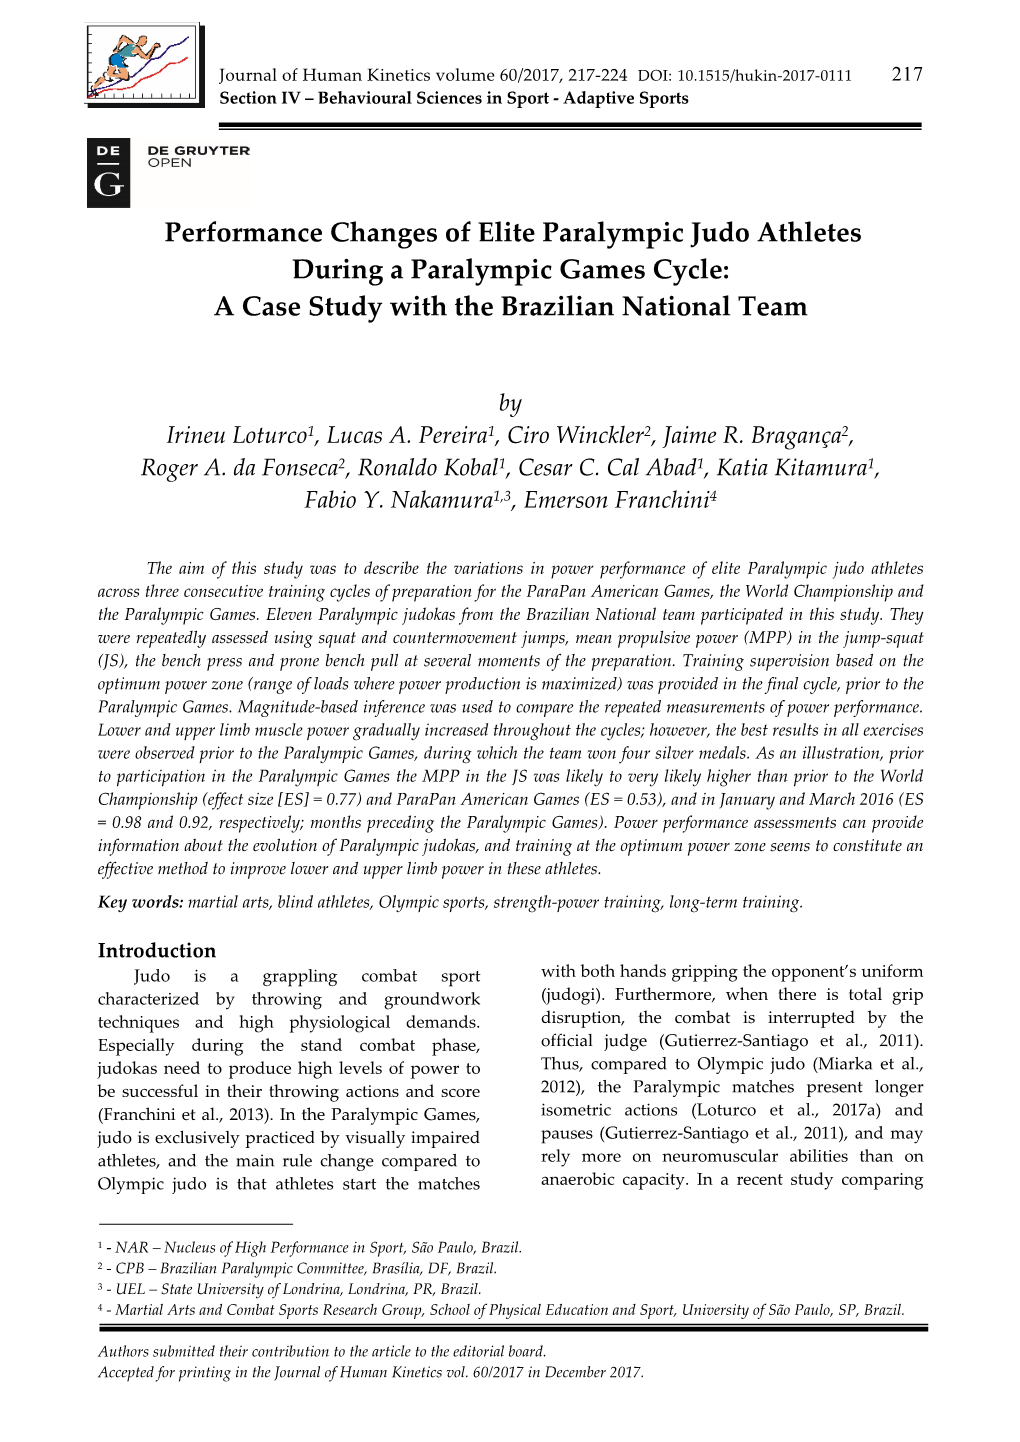 Performance Changes of Elite Paralympic Judo Athletes During a Paralympic Games Cycle: a Case Study with the Brazilian National Team